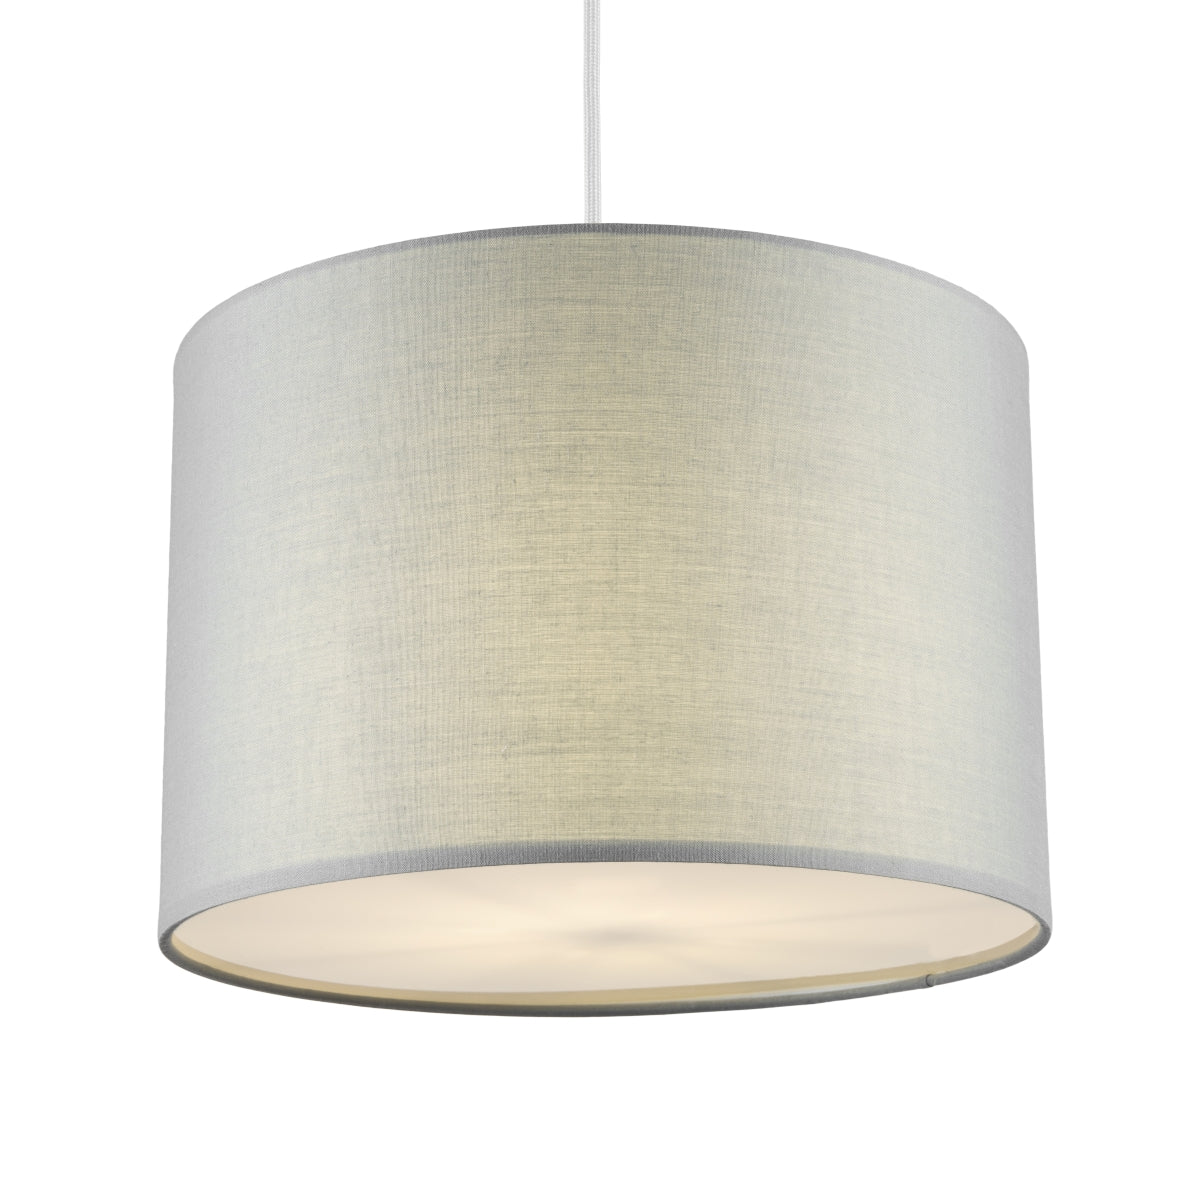 The Lucia is a modern cylinder drum shaped lamp shade in a luxury cotton finish and opal diffuser. This fantastic shade can double up as either a ceiling pendant light shade or table lampshade. Easily fits to your standard ceiling light fitting- no wiring required.